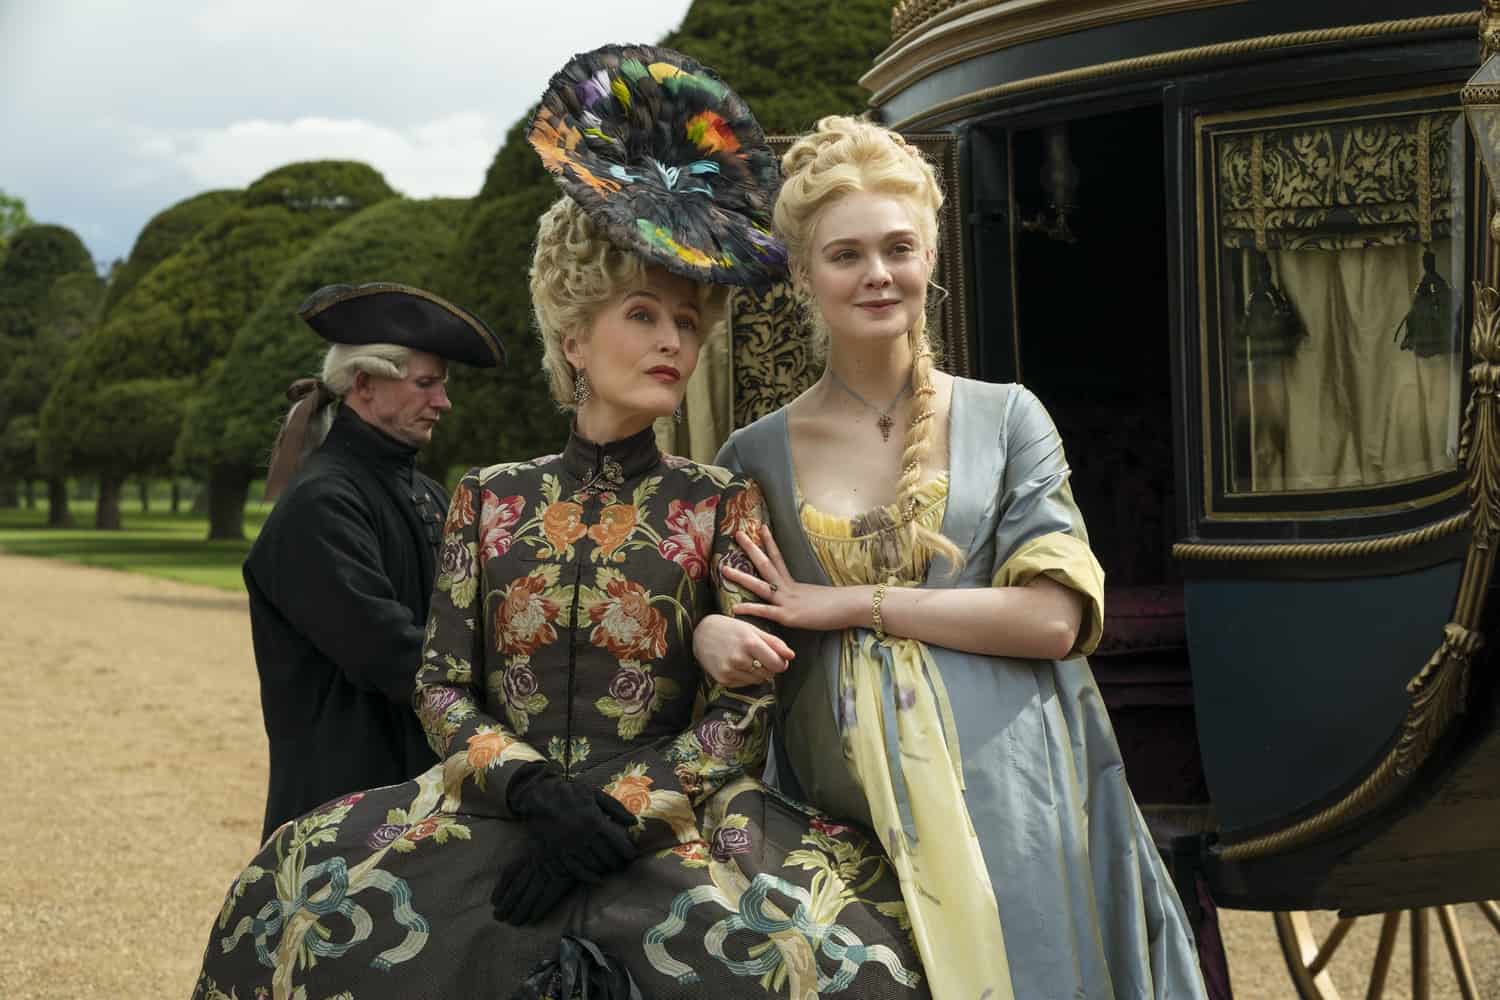 Two women dressed in historical gowns step out of a carriage in this image from Thruline Entertainment.